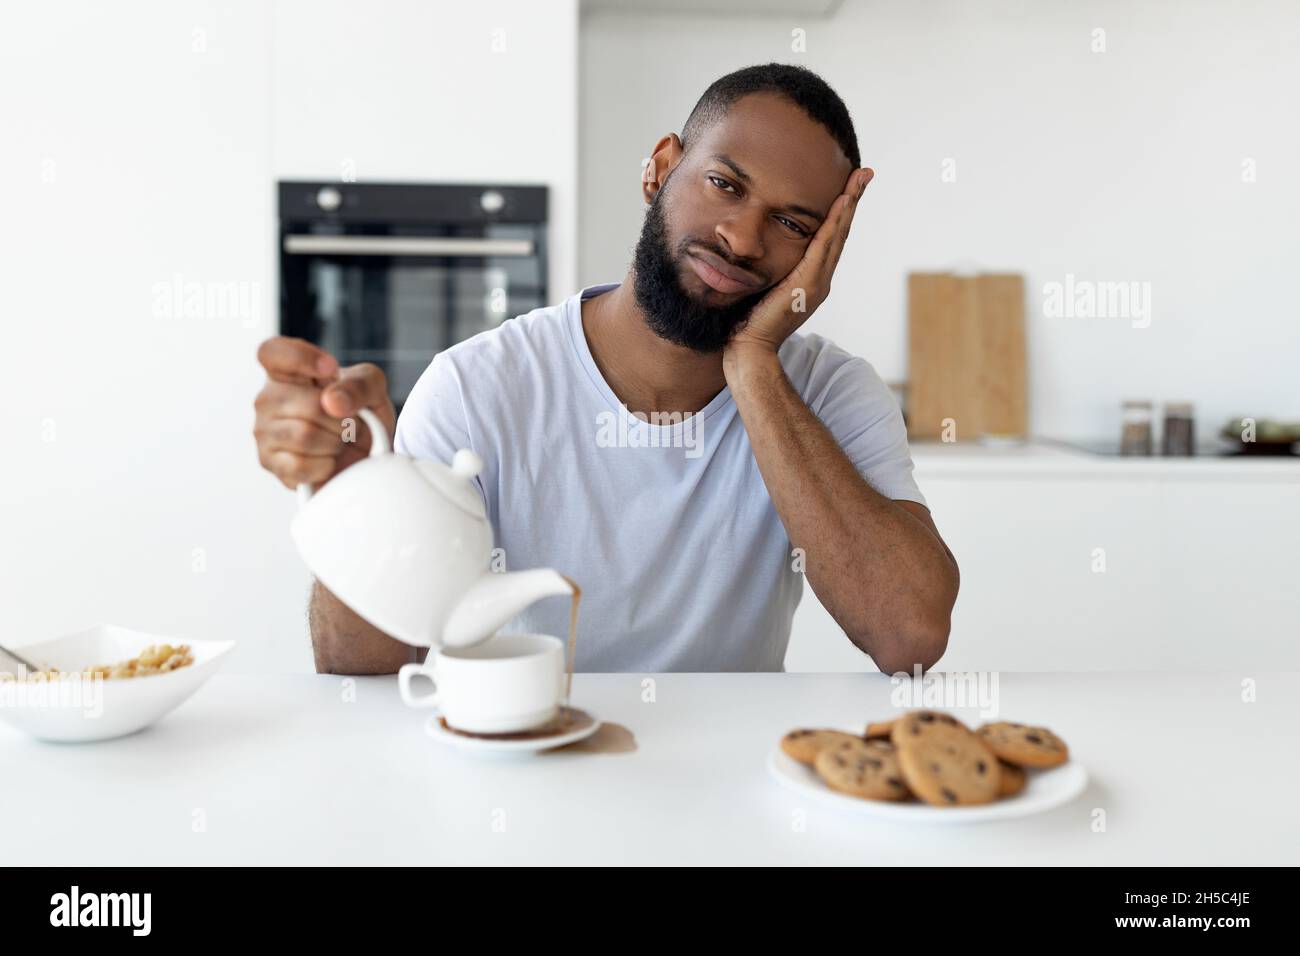 Black guy pouring coffee away from cup spilling hot drink Stock Photo